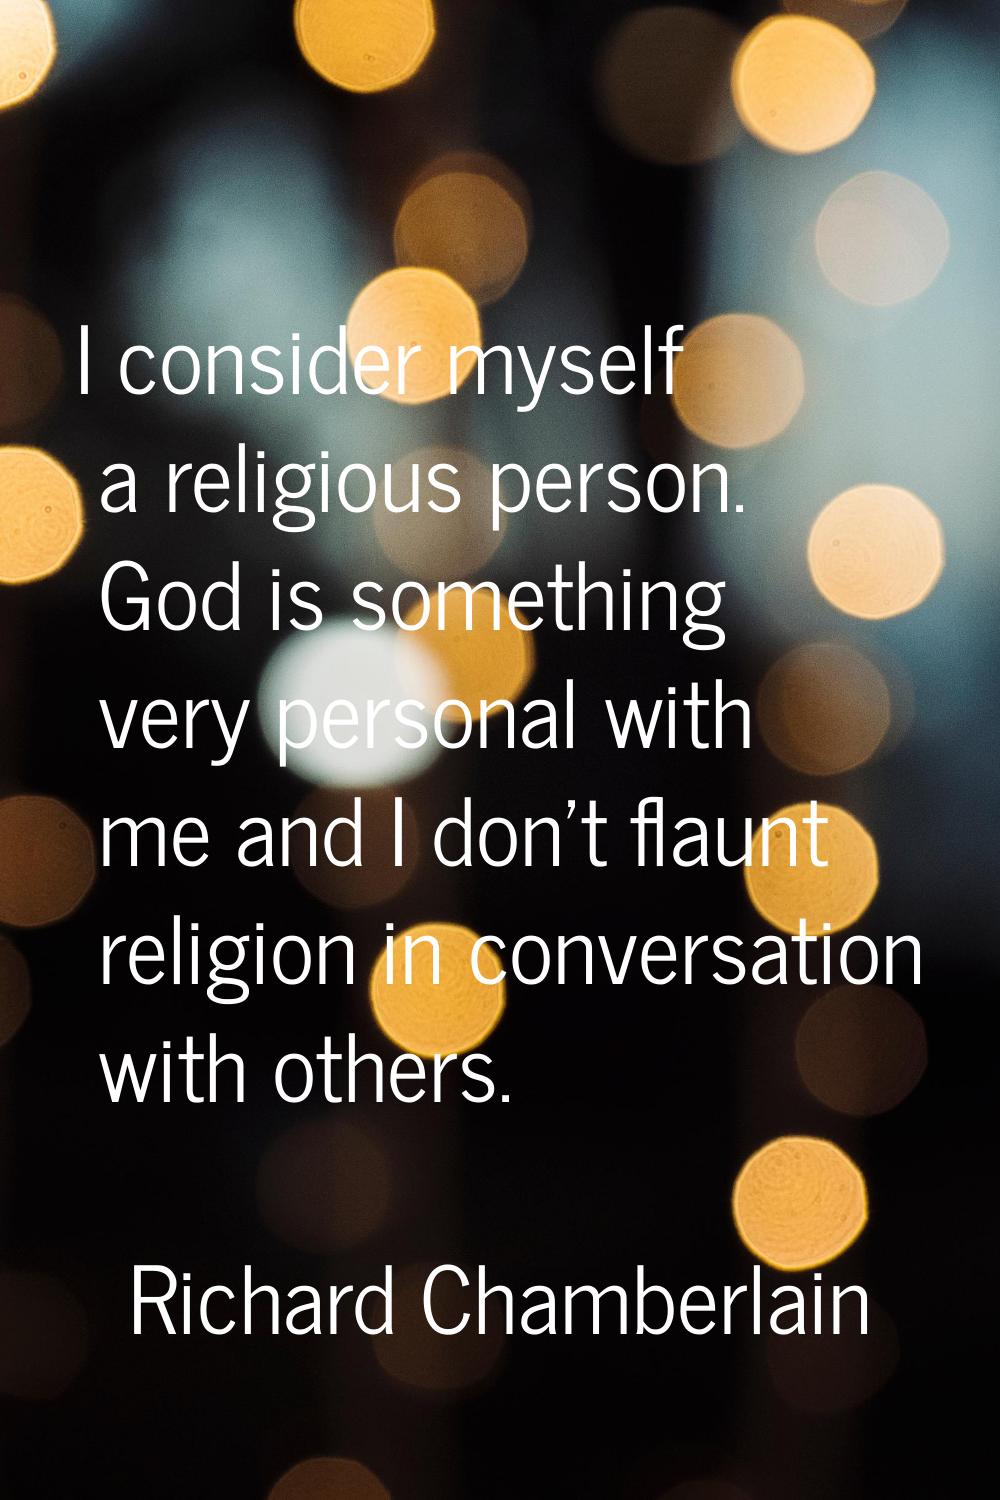 I consider myself a religious person. God is something very personal with me and I don't flaunt rel